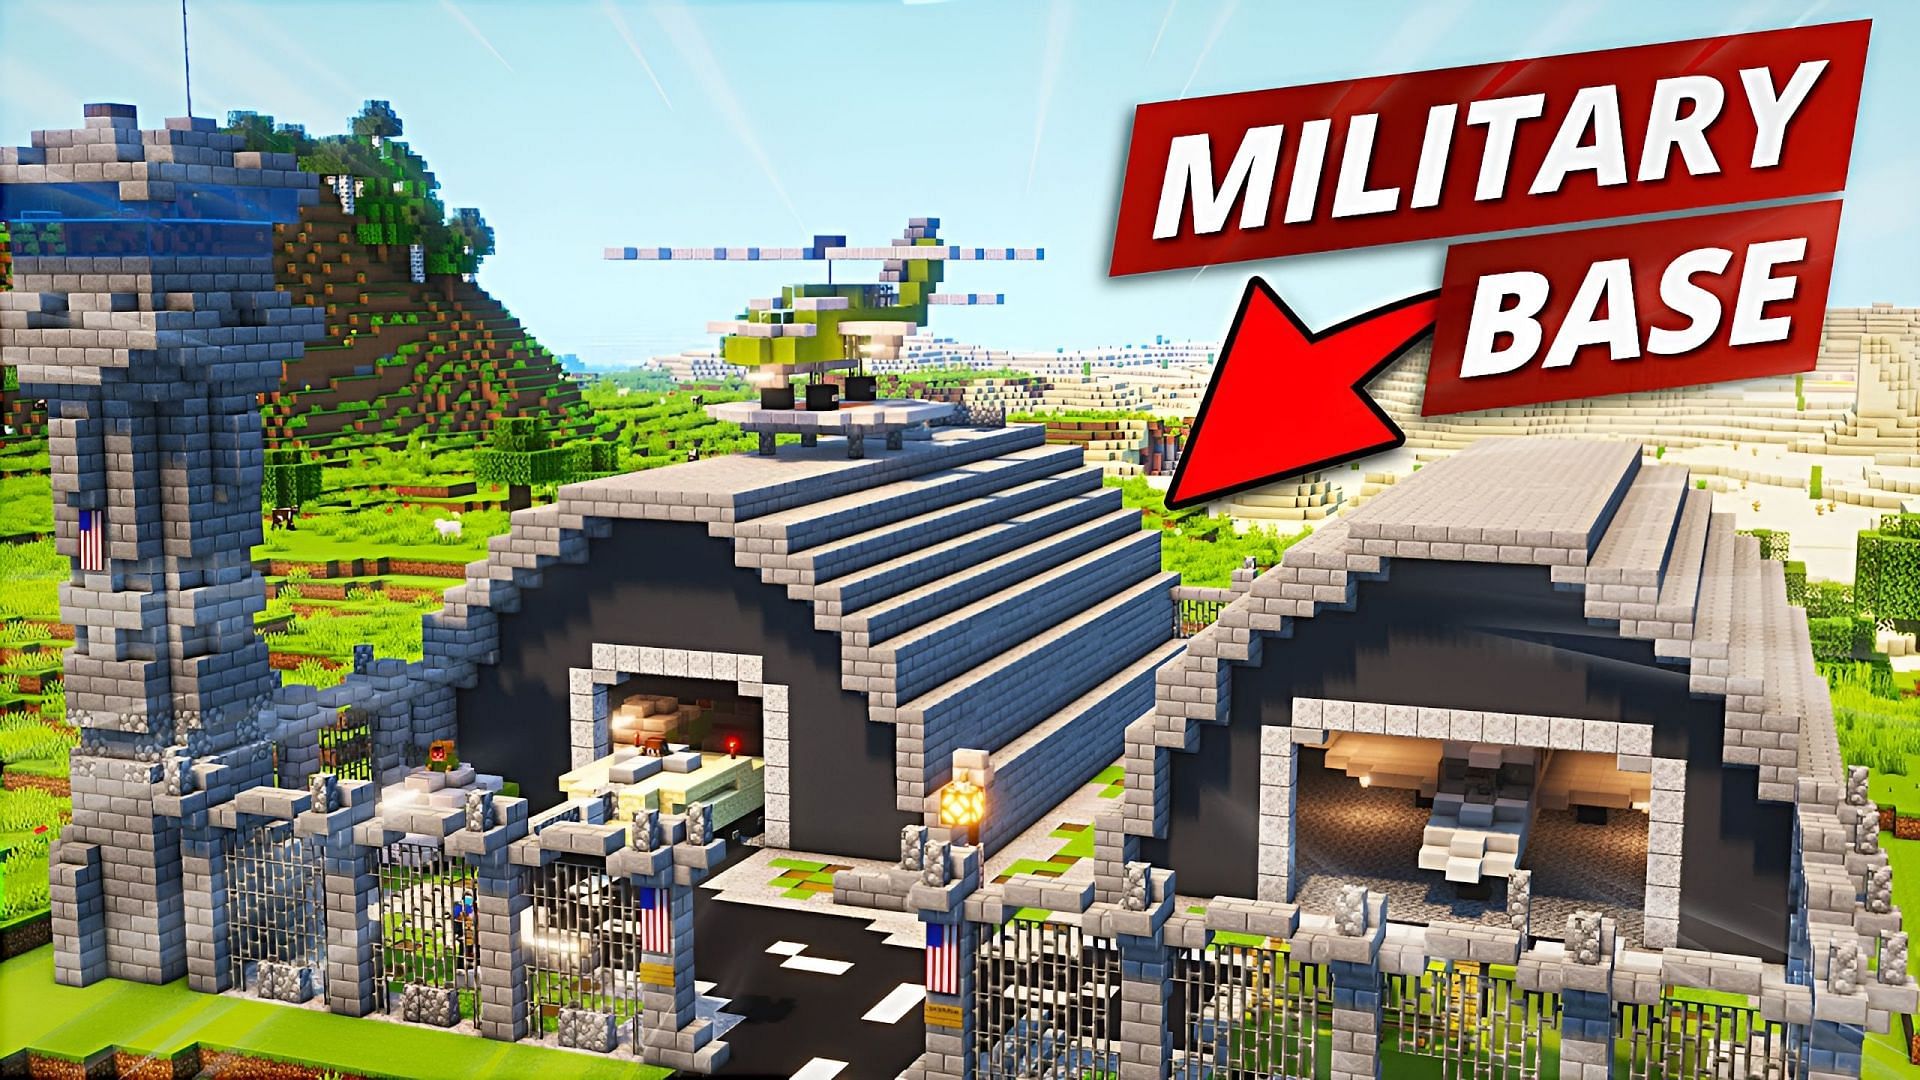 Military bases make for crazy cool Minecraft builds (Image via Youtube/SKYROAD Minecraft)